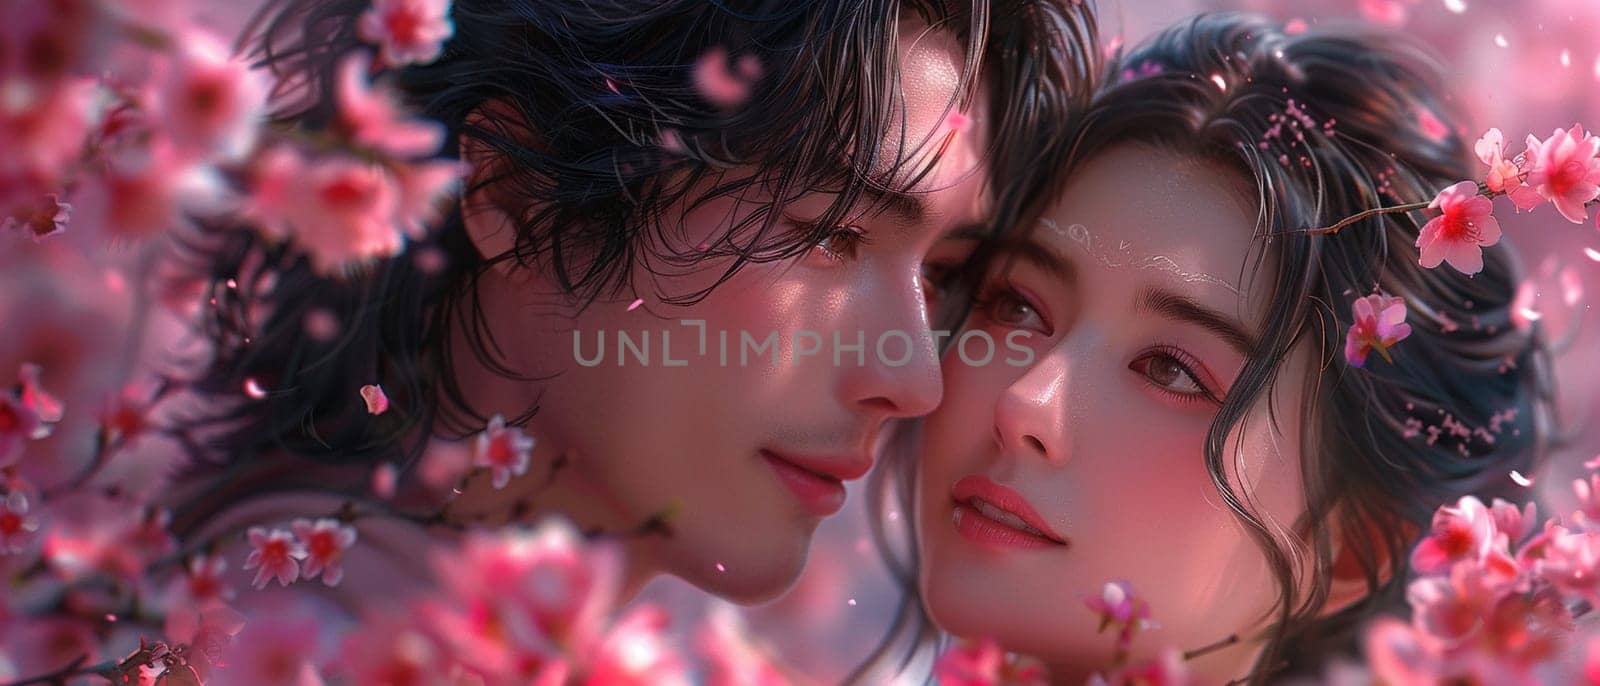 Intimate moment under cherry blossoms illustrated in a soft by Benzoix